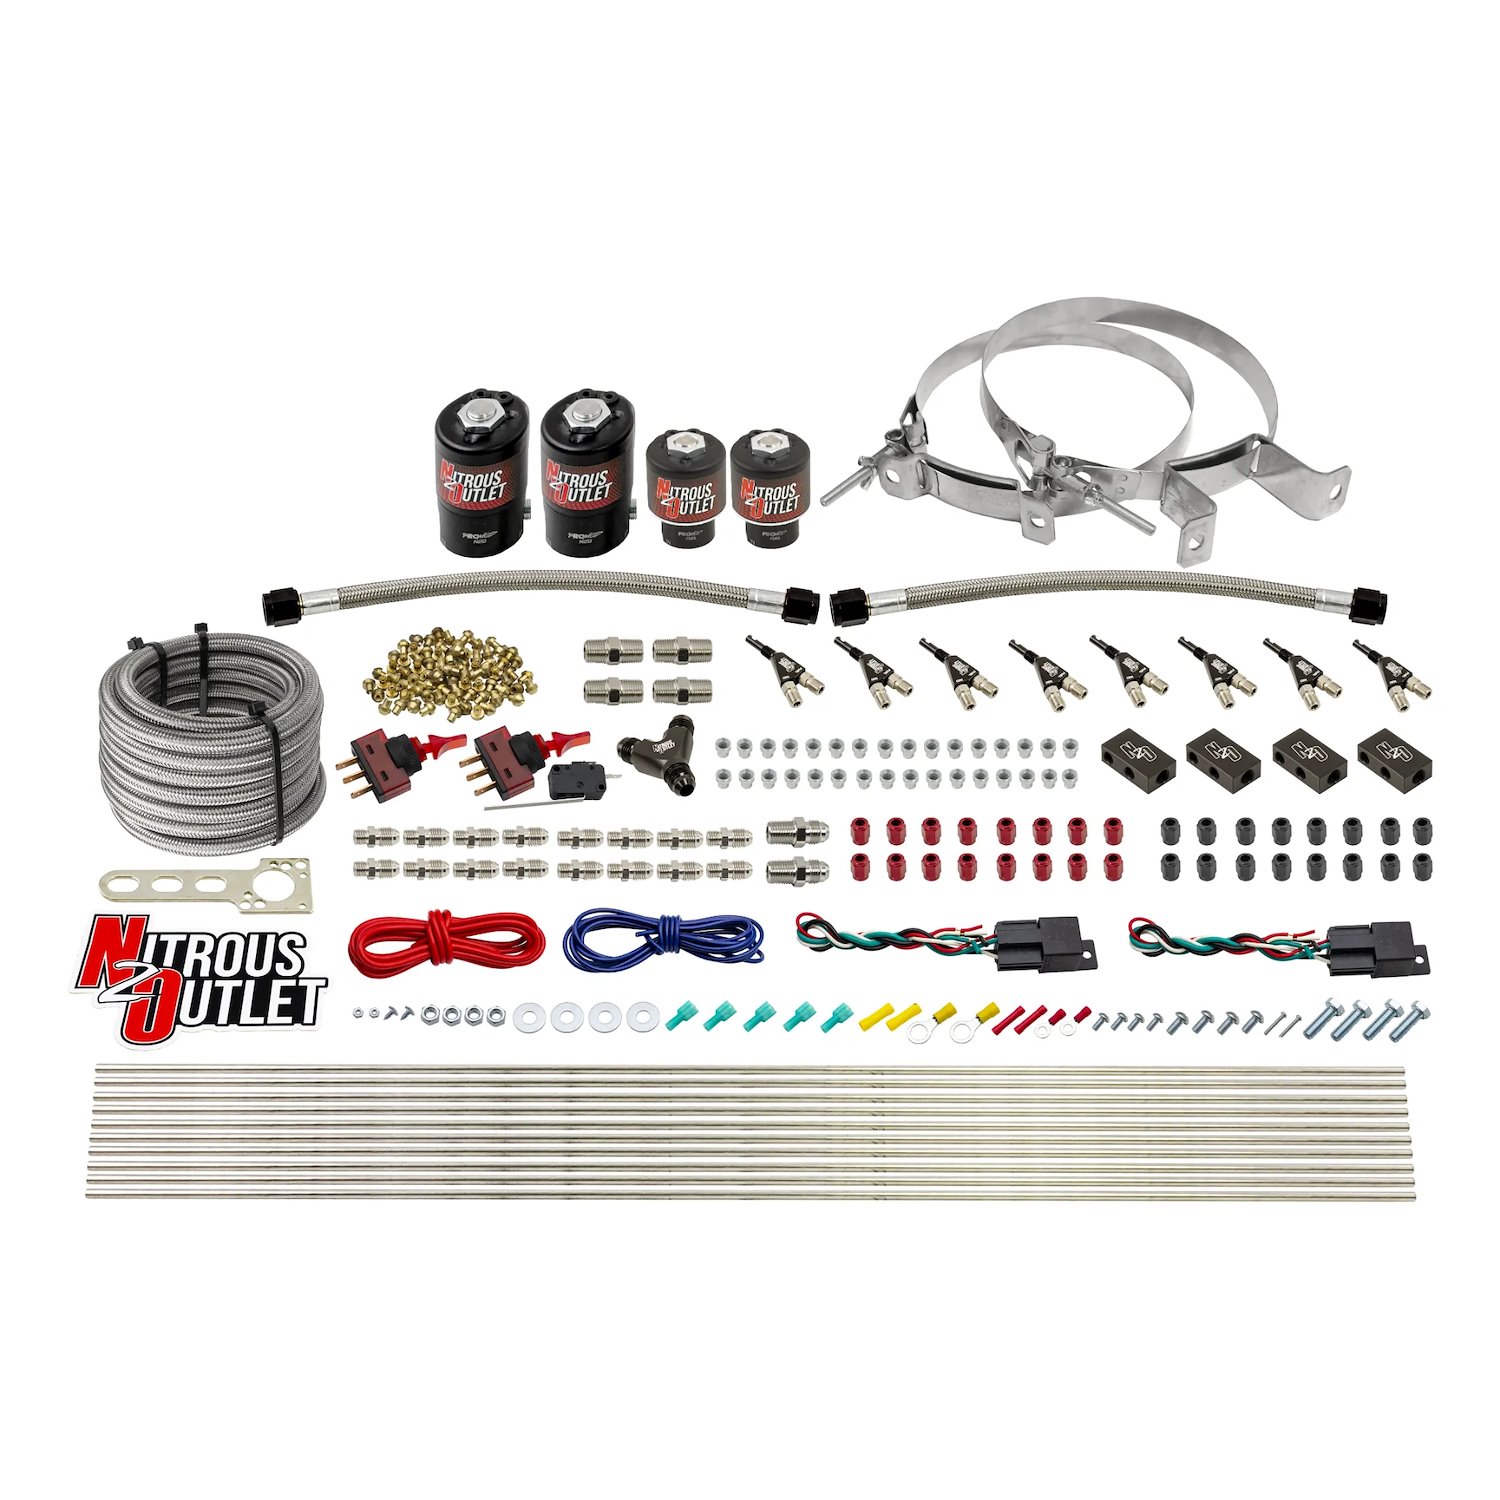 00-10362-DS-00 4-Cyl Dual-Stage Direct Port System, Two .122 Nitrous Solenoids/Two .177 Fuel Solenoids/Distribution Blocks